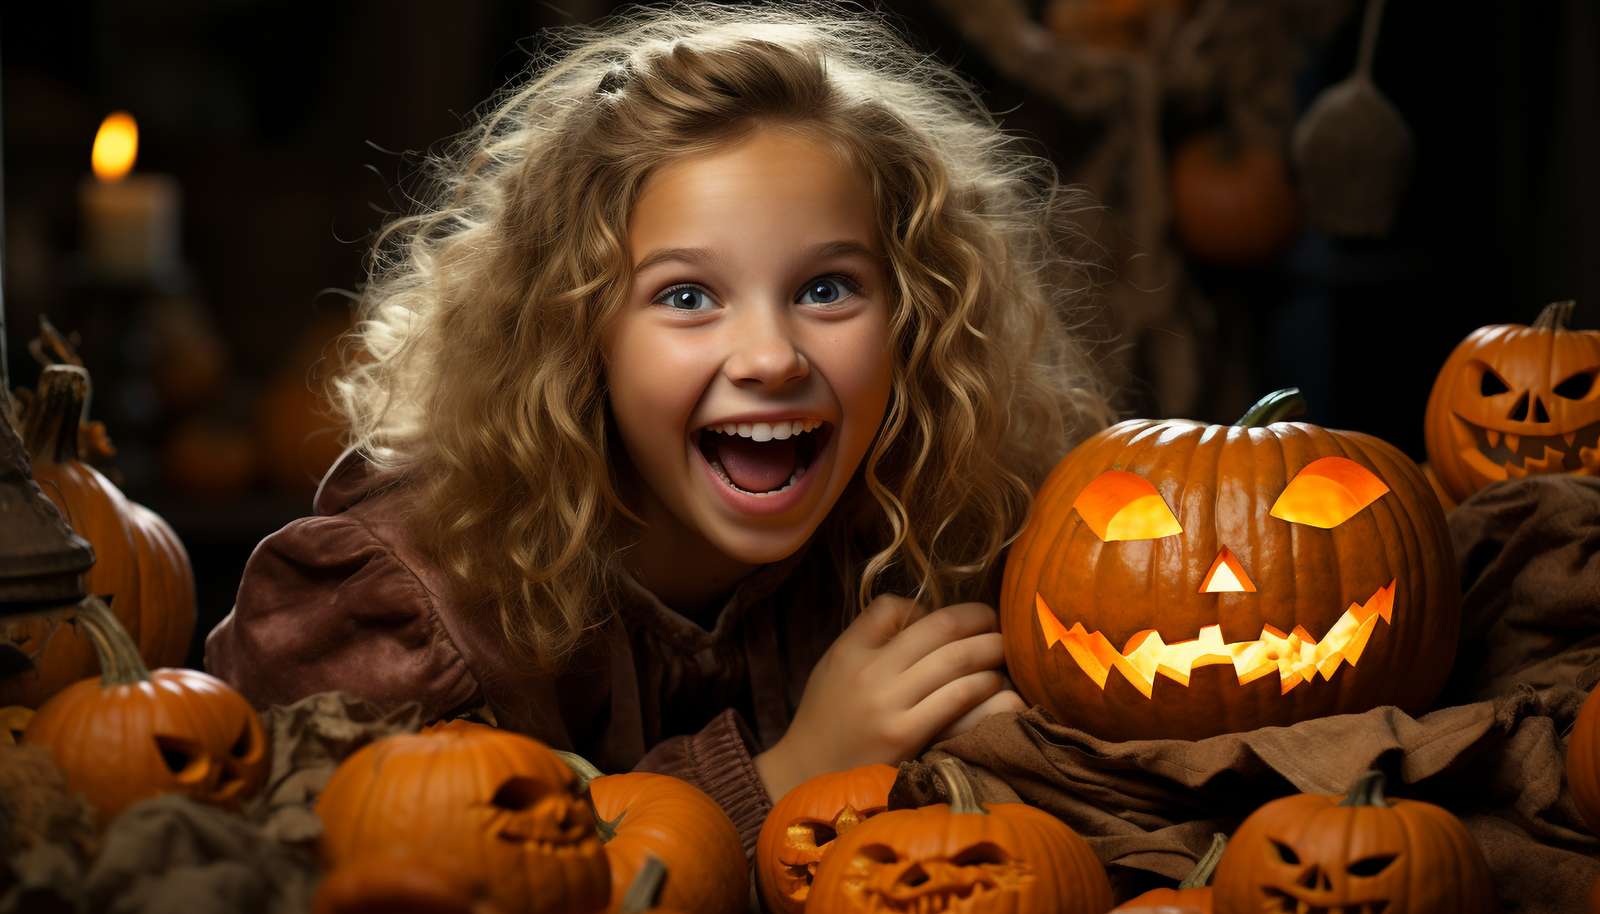 Little girl with scary pumpkins online puzzle